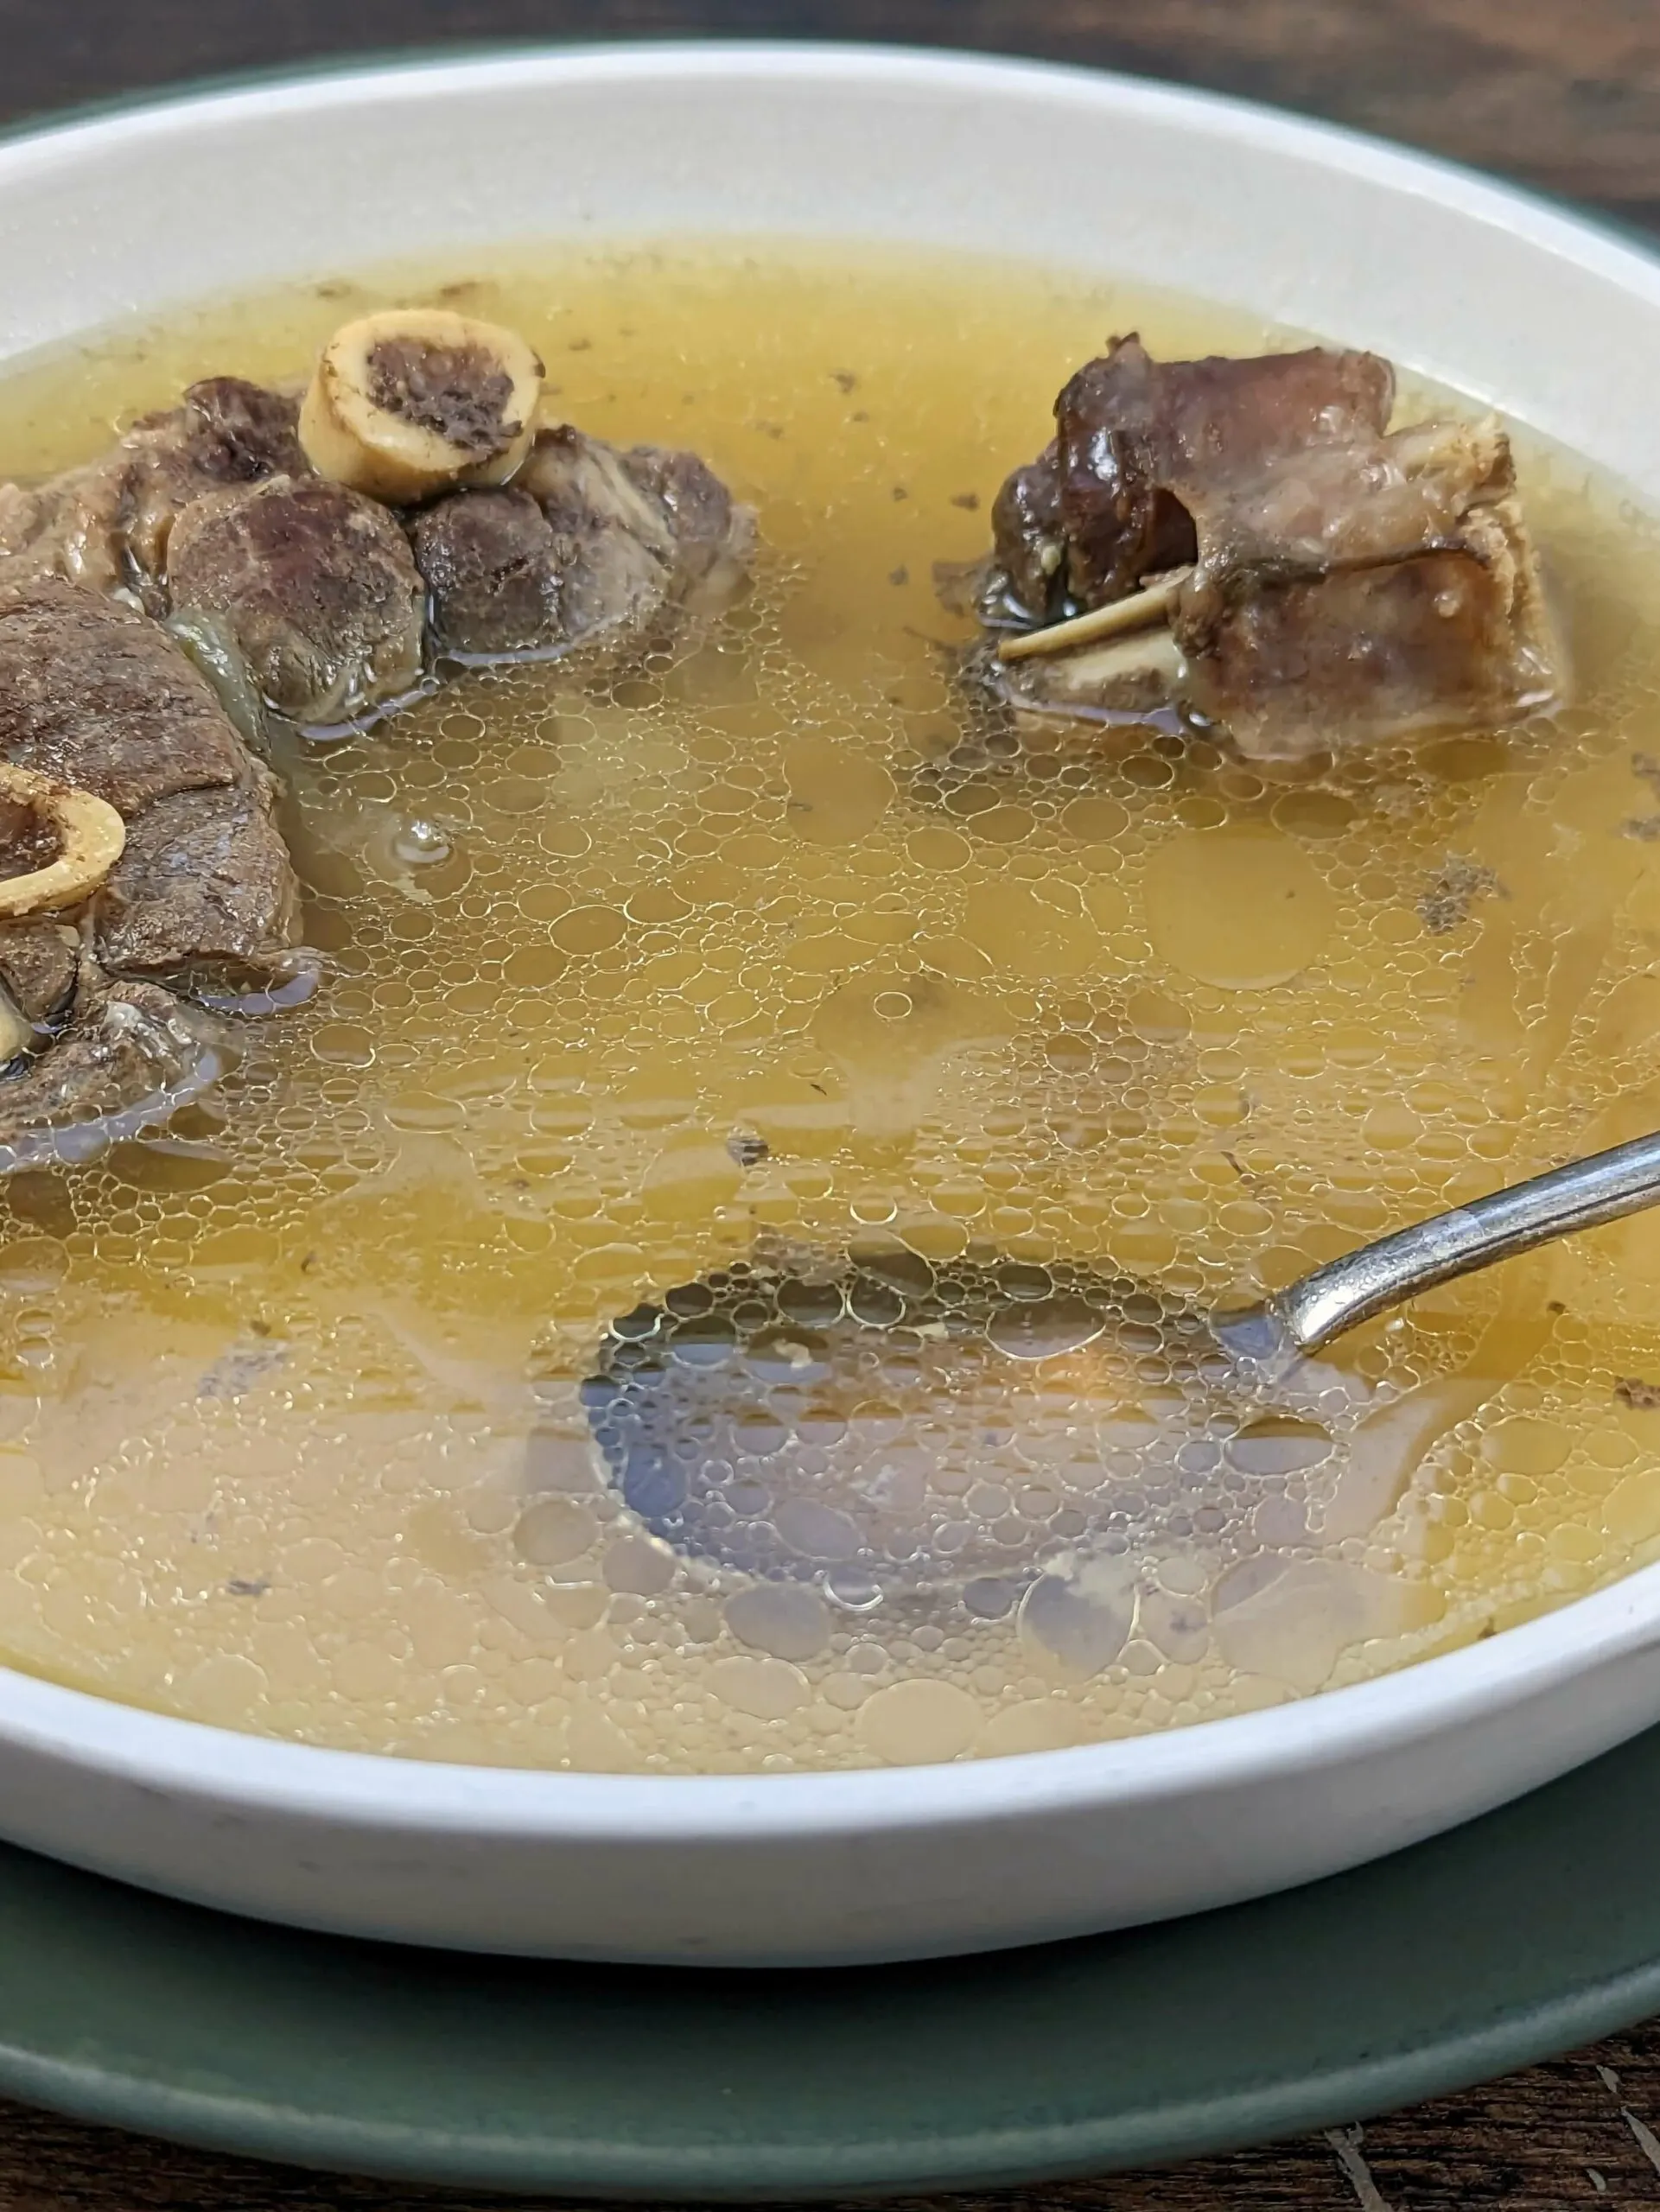 A close up of a bowl of Mutton Soup with a spoon in it.